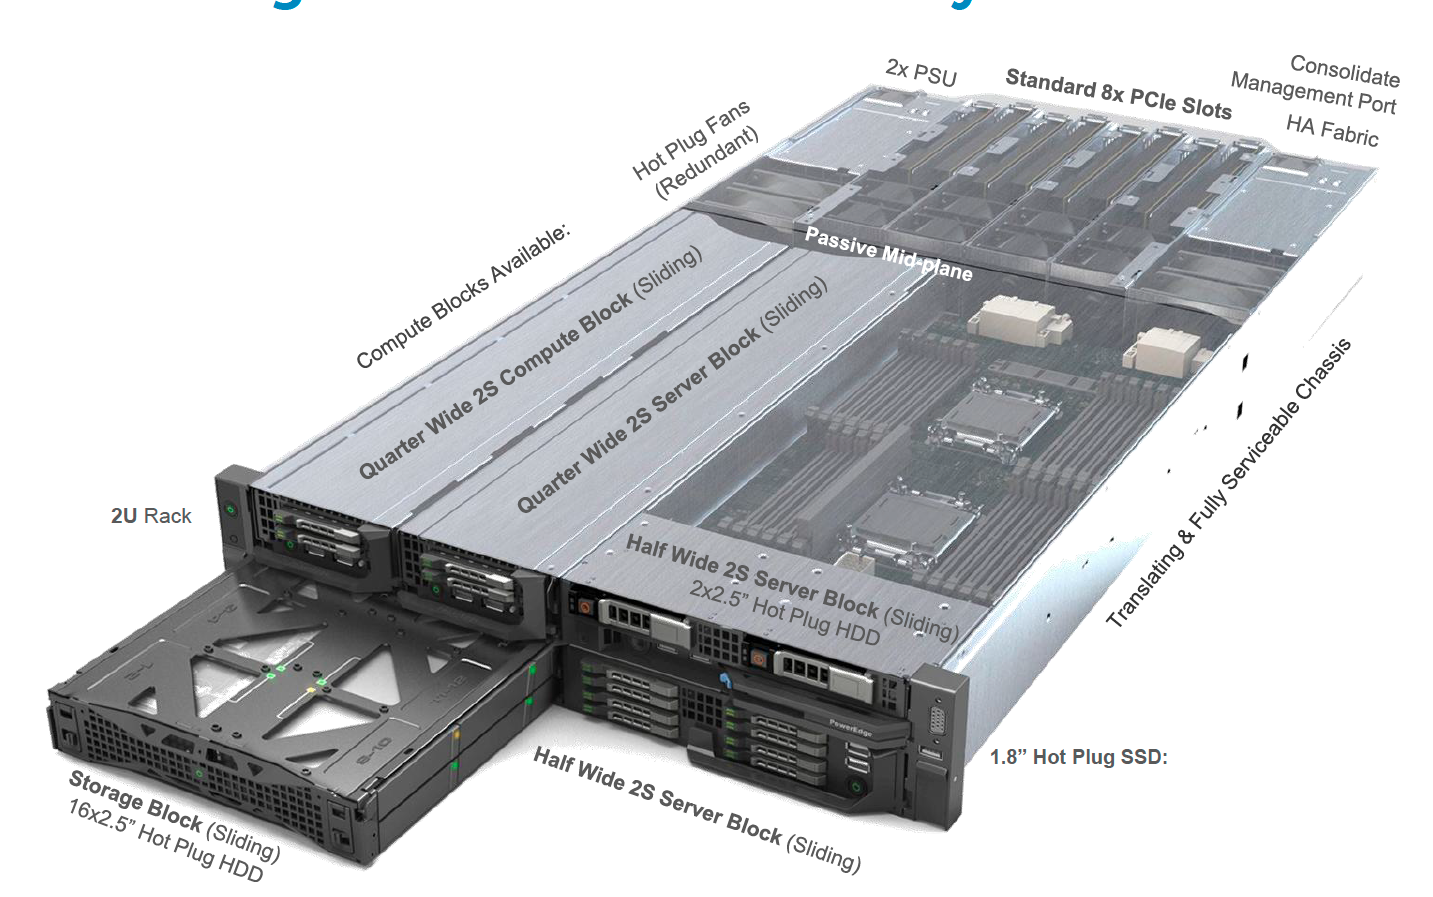 Dell looks to wow clients with a new type of converged system |  Computerworld